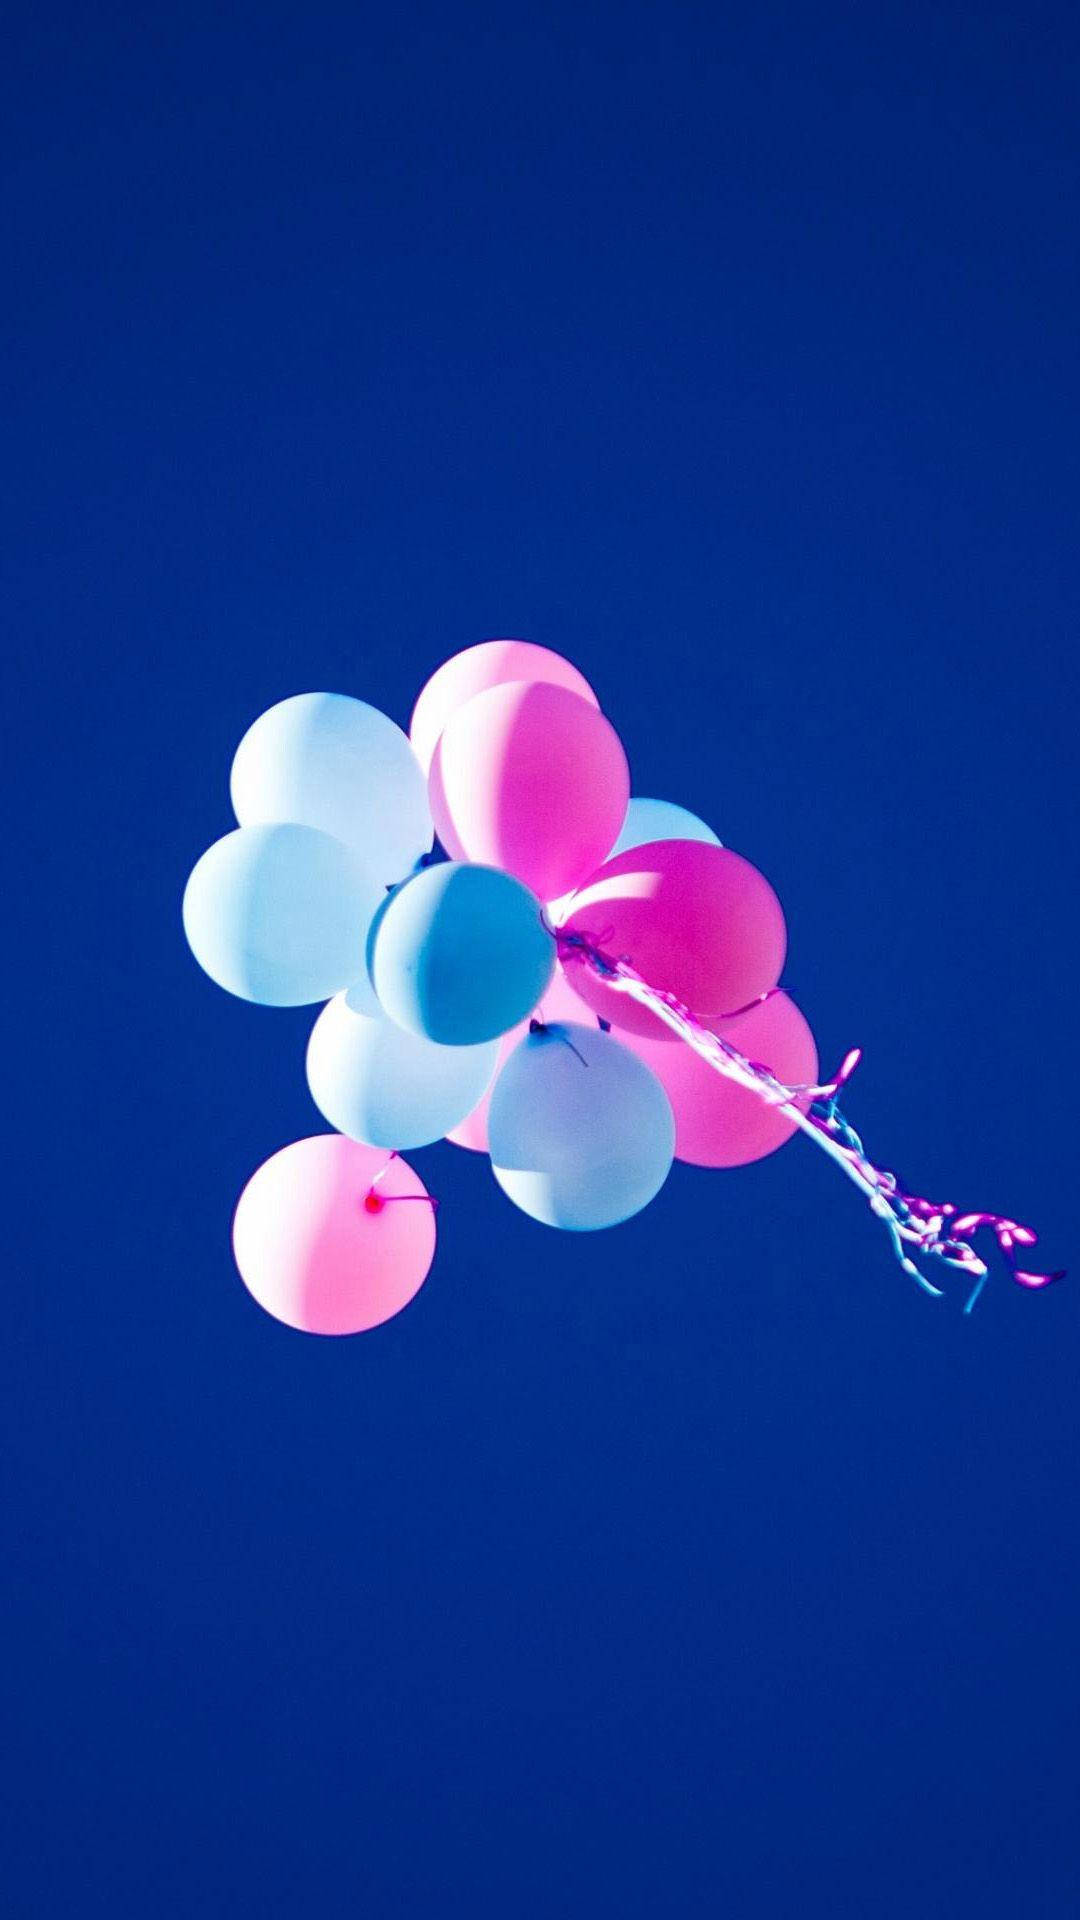 Pink And Blue Balloons Background